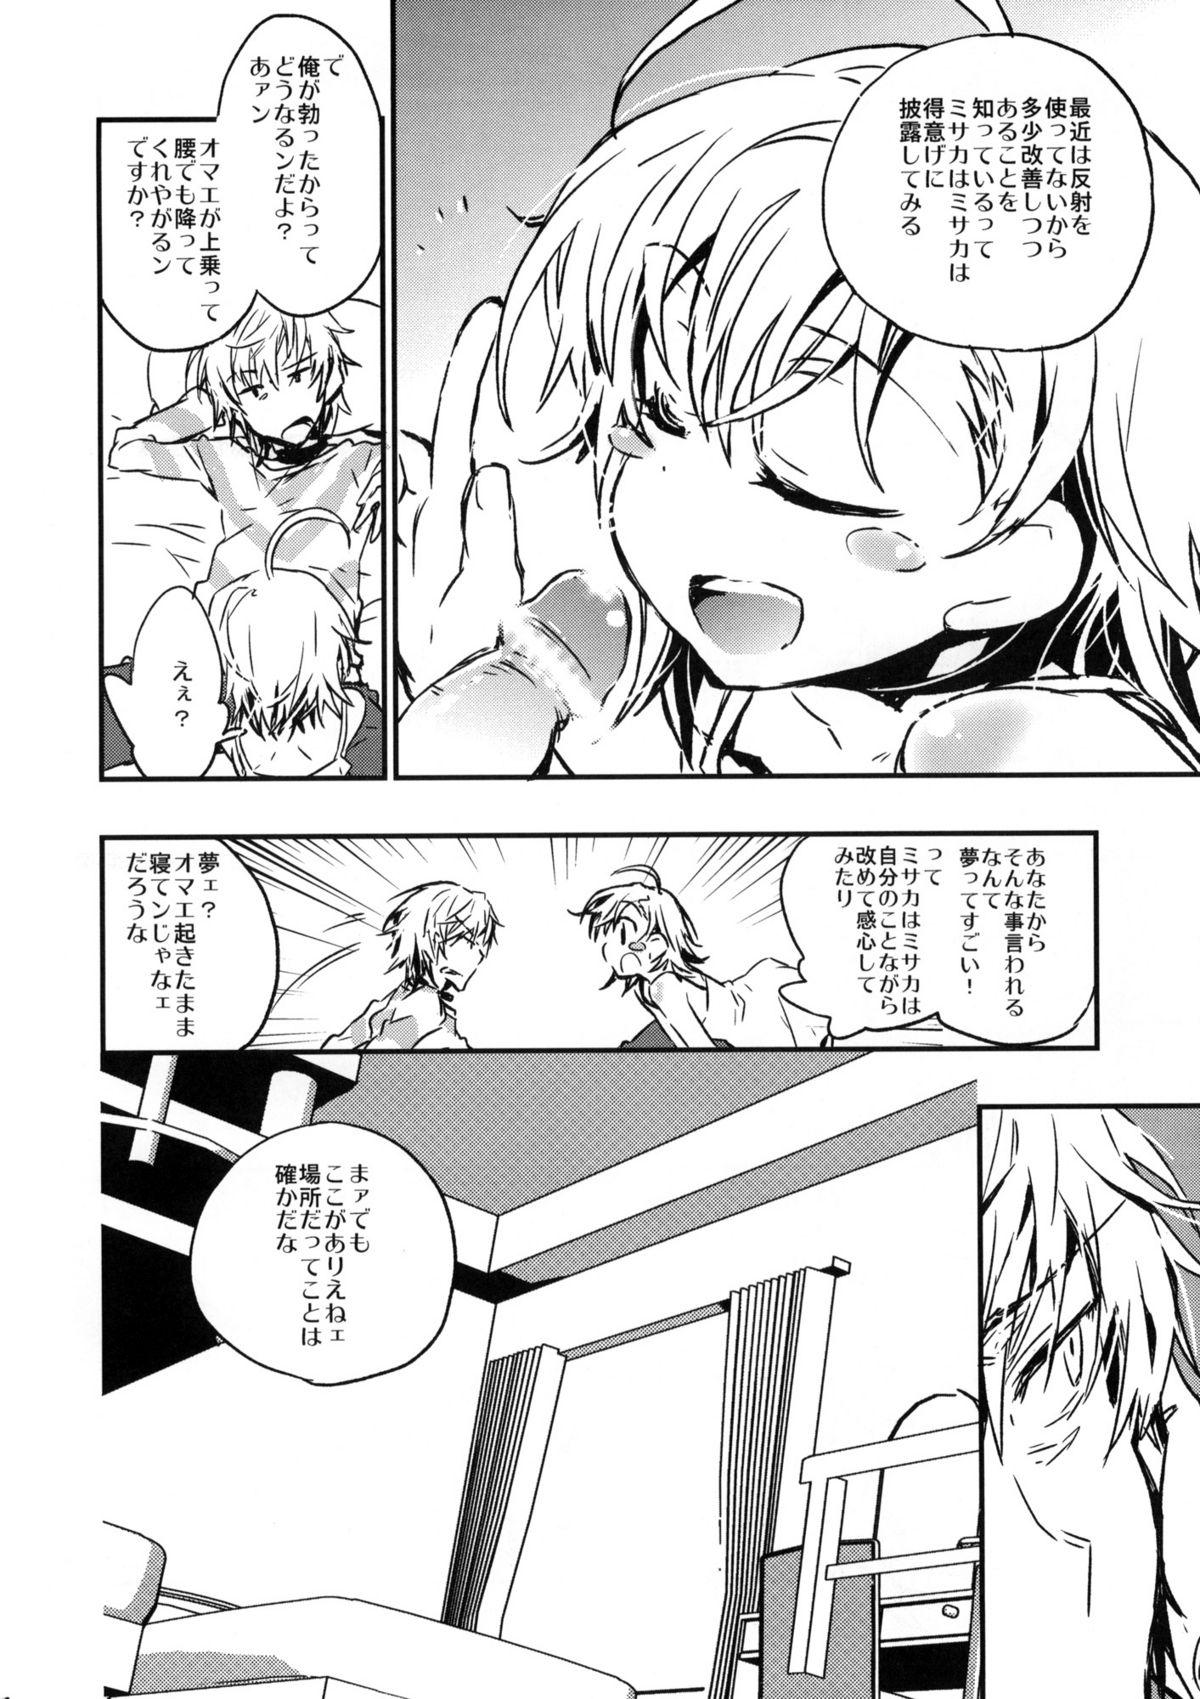 Friend We're part of each other - Toaru majutsu no index Gayfuck - Page 5